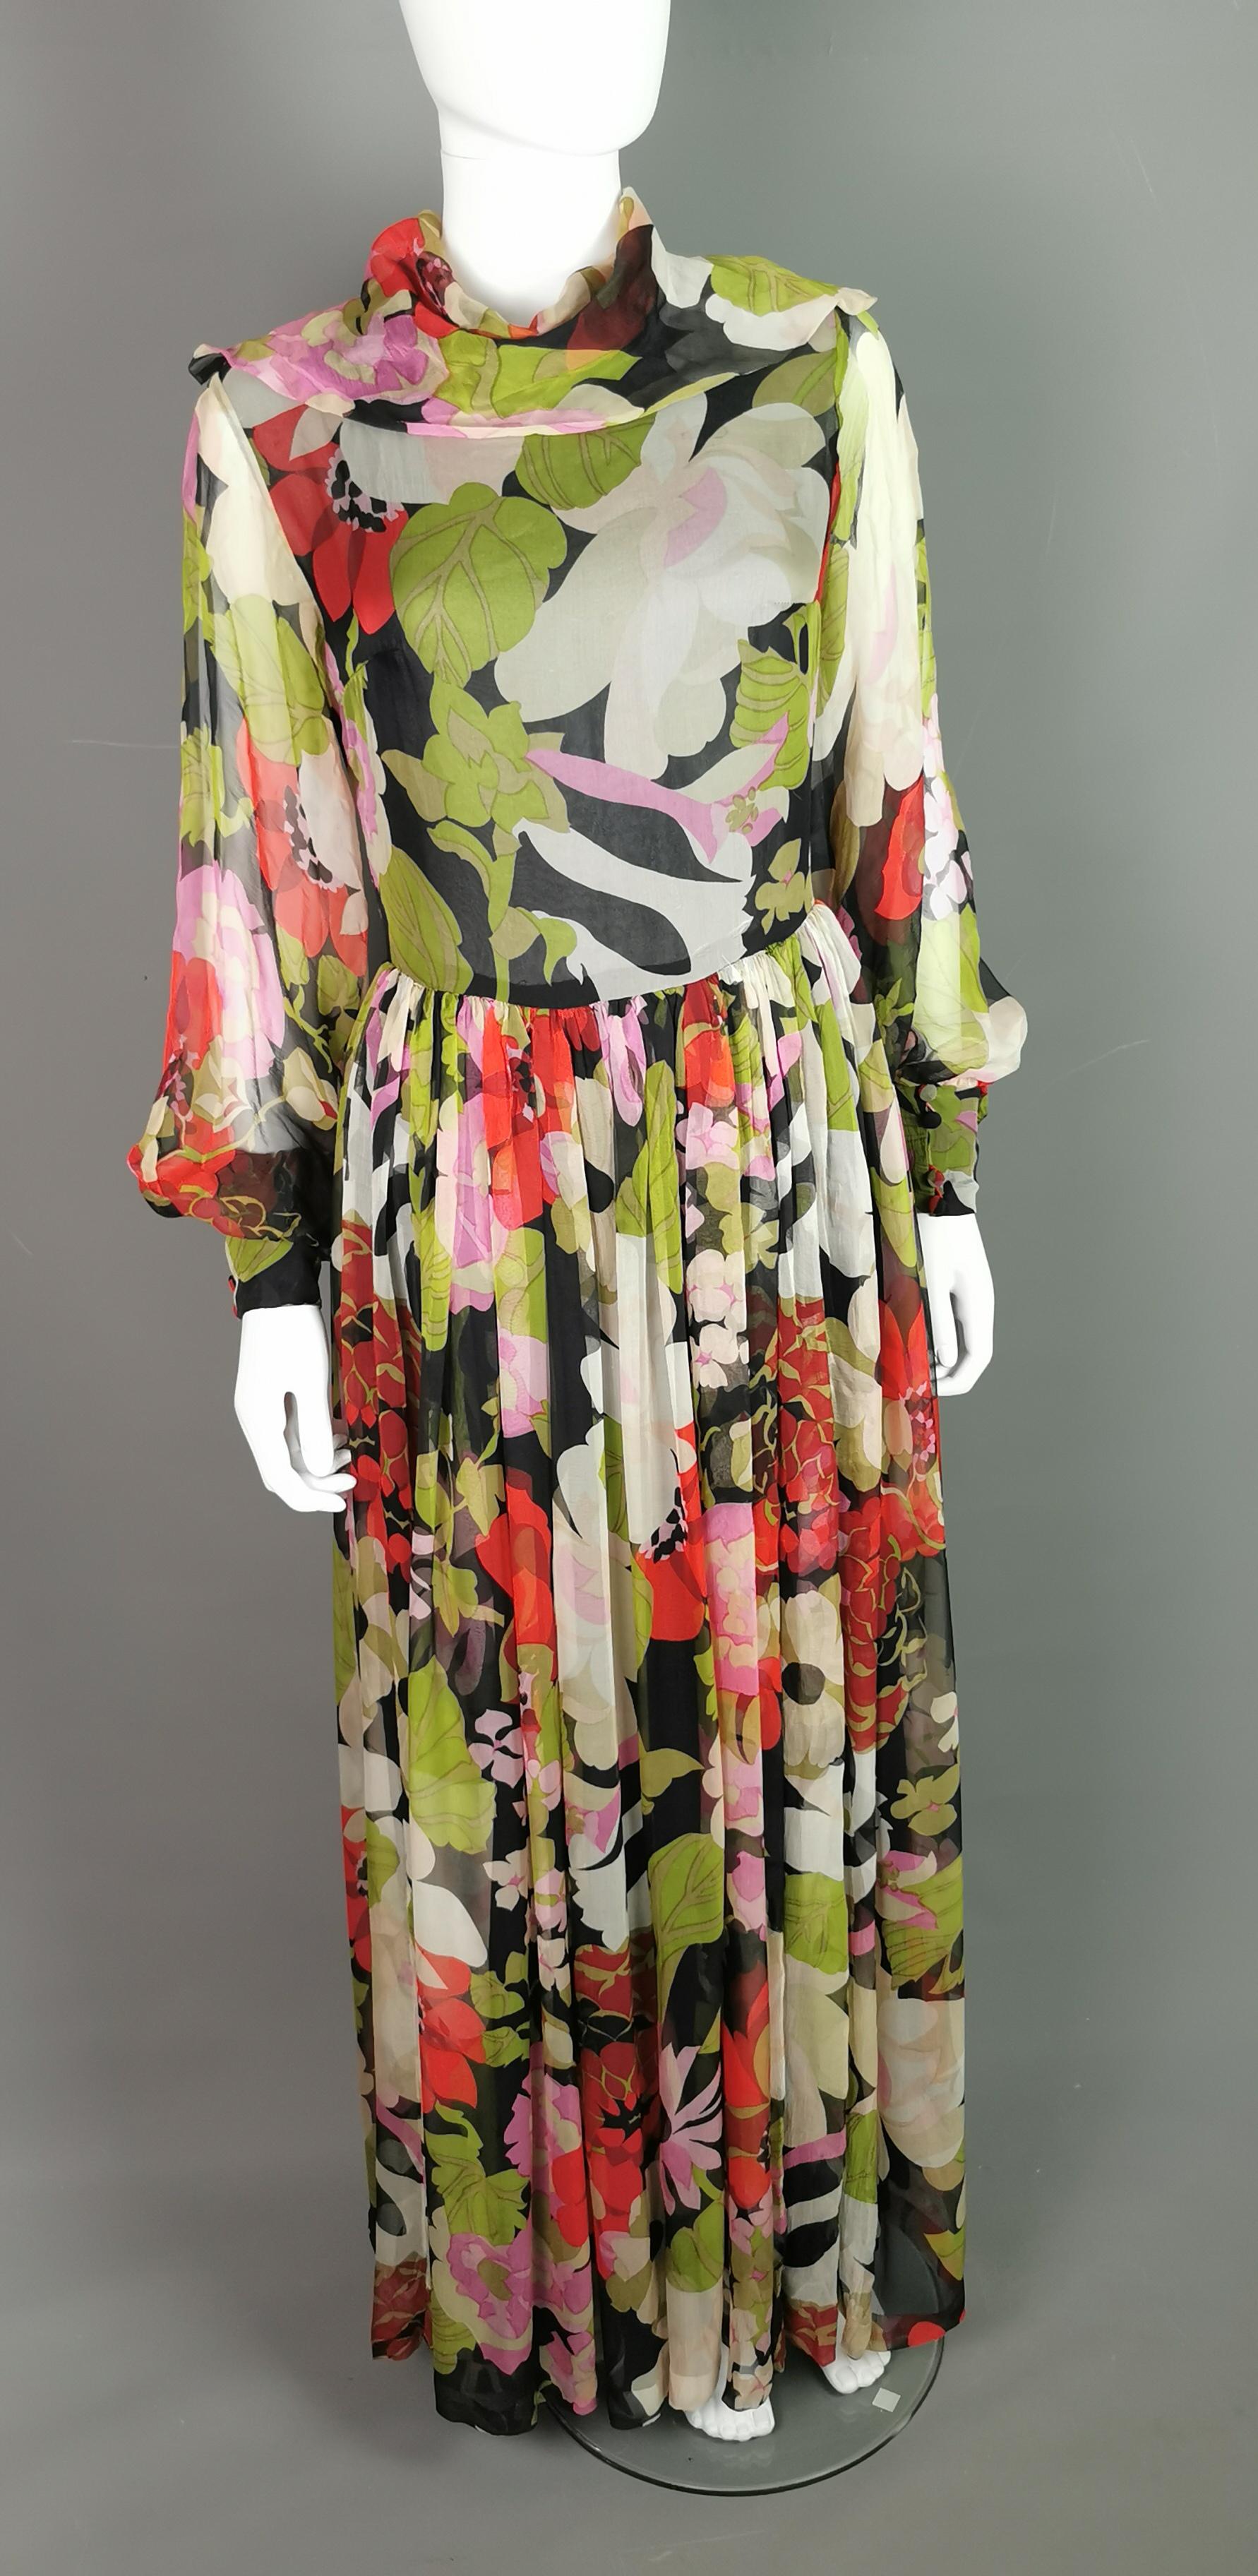 The most beautiful vintage c1970s floral maxi dress.

The dress is made from a lovely soft, sheer silk Georgette printed with a floral design on a dark ground, it has an unusual cowl style neckline and gorgeous bishop sleeves with deep button up